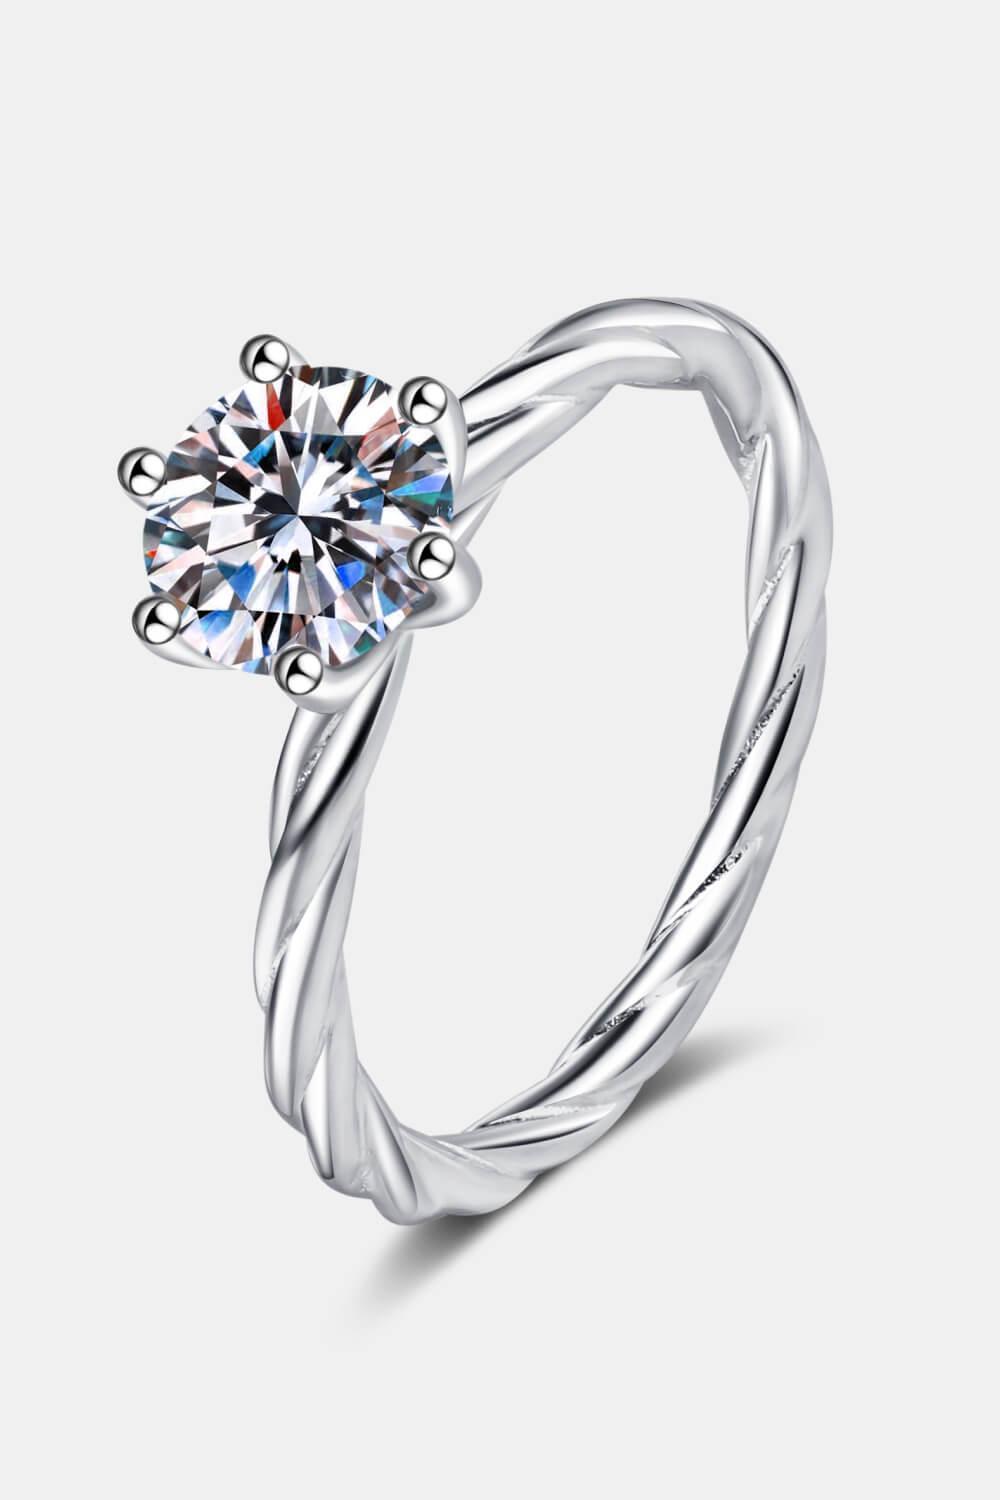 Twisted In Luxury Sterling Silver 1 Carat Moissanite Ring - MXSTUDIO.COM